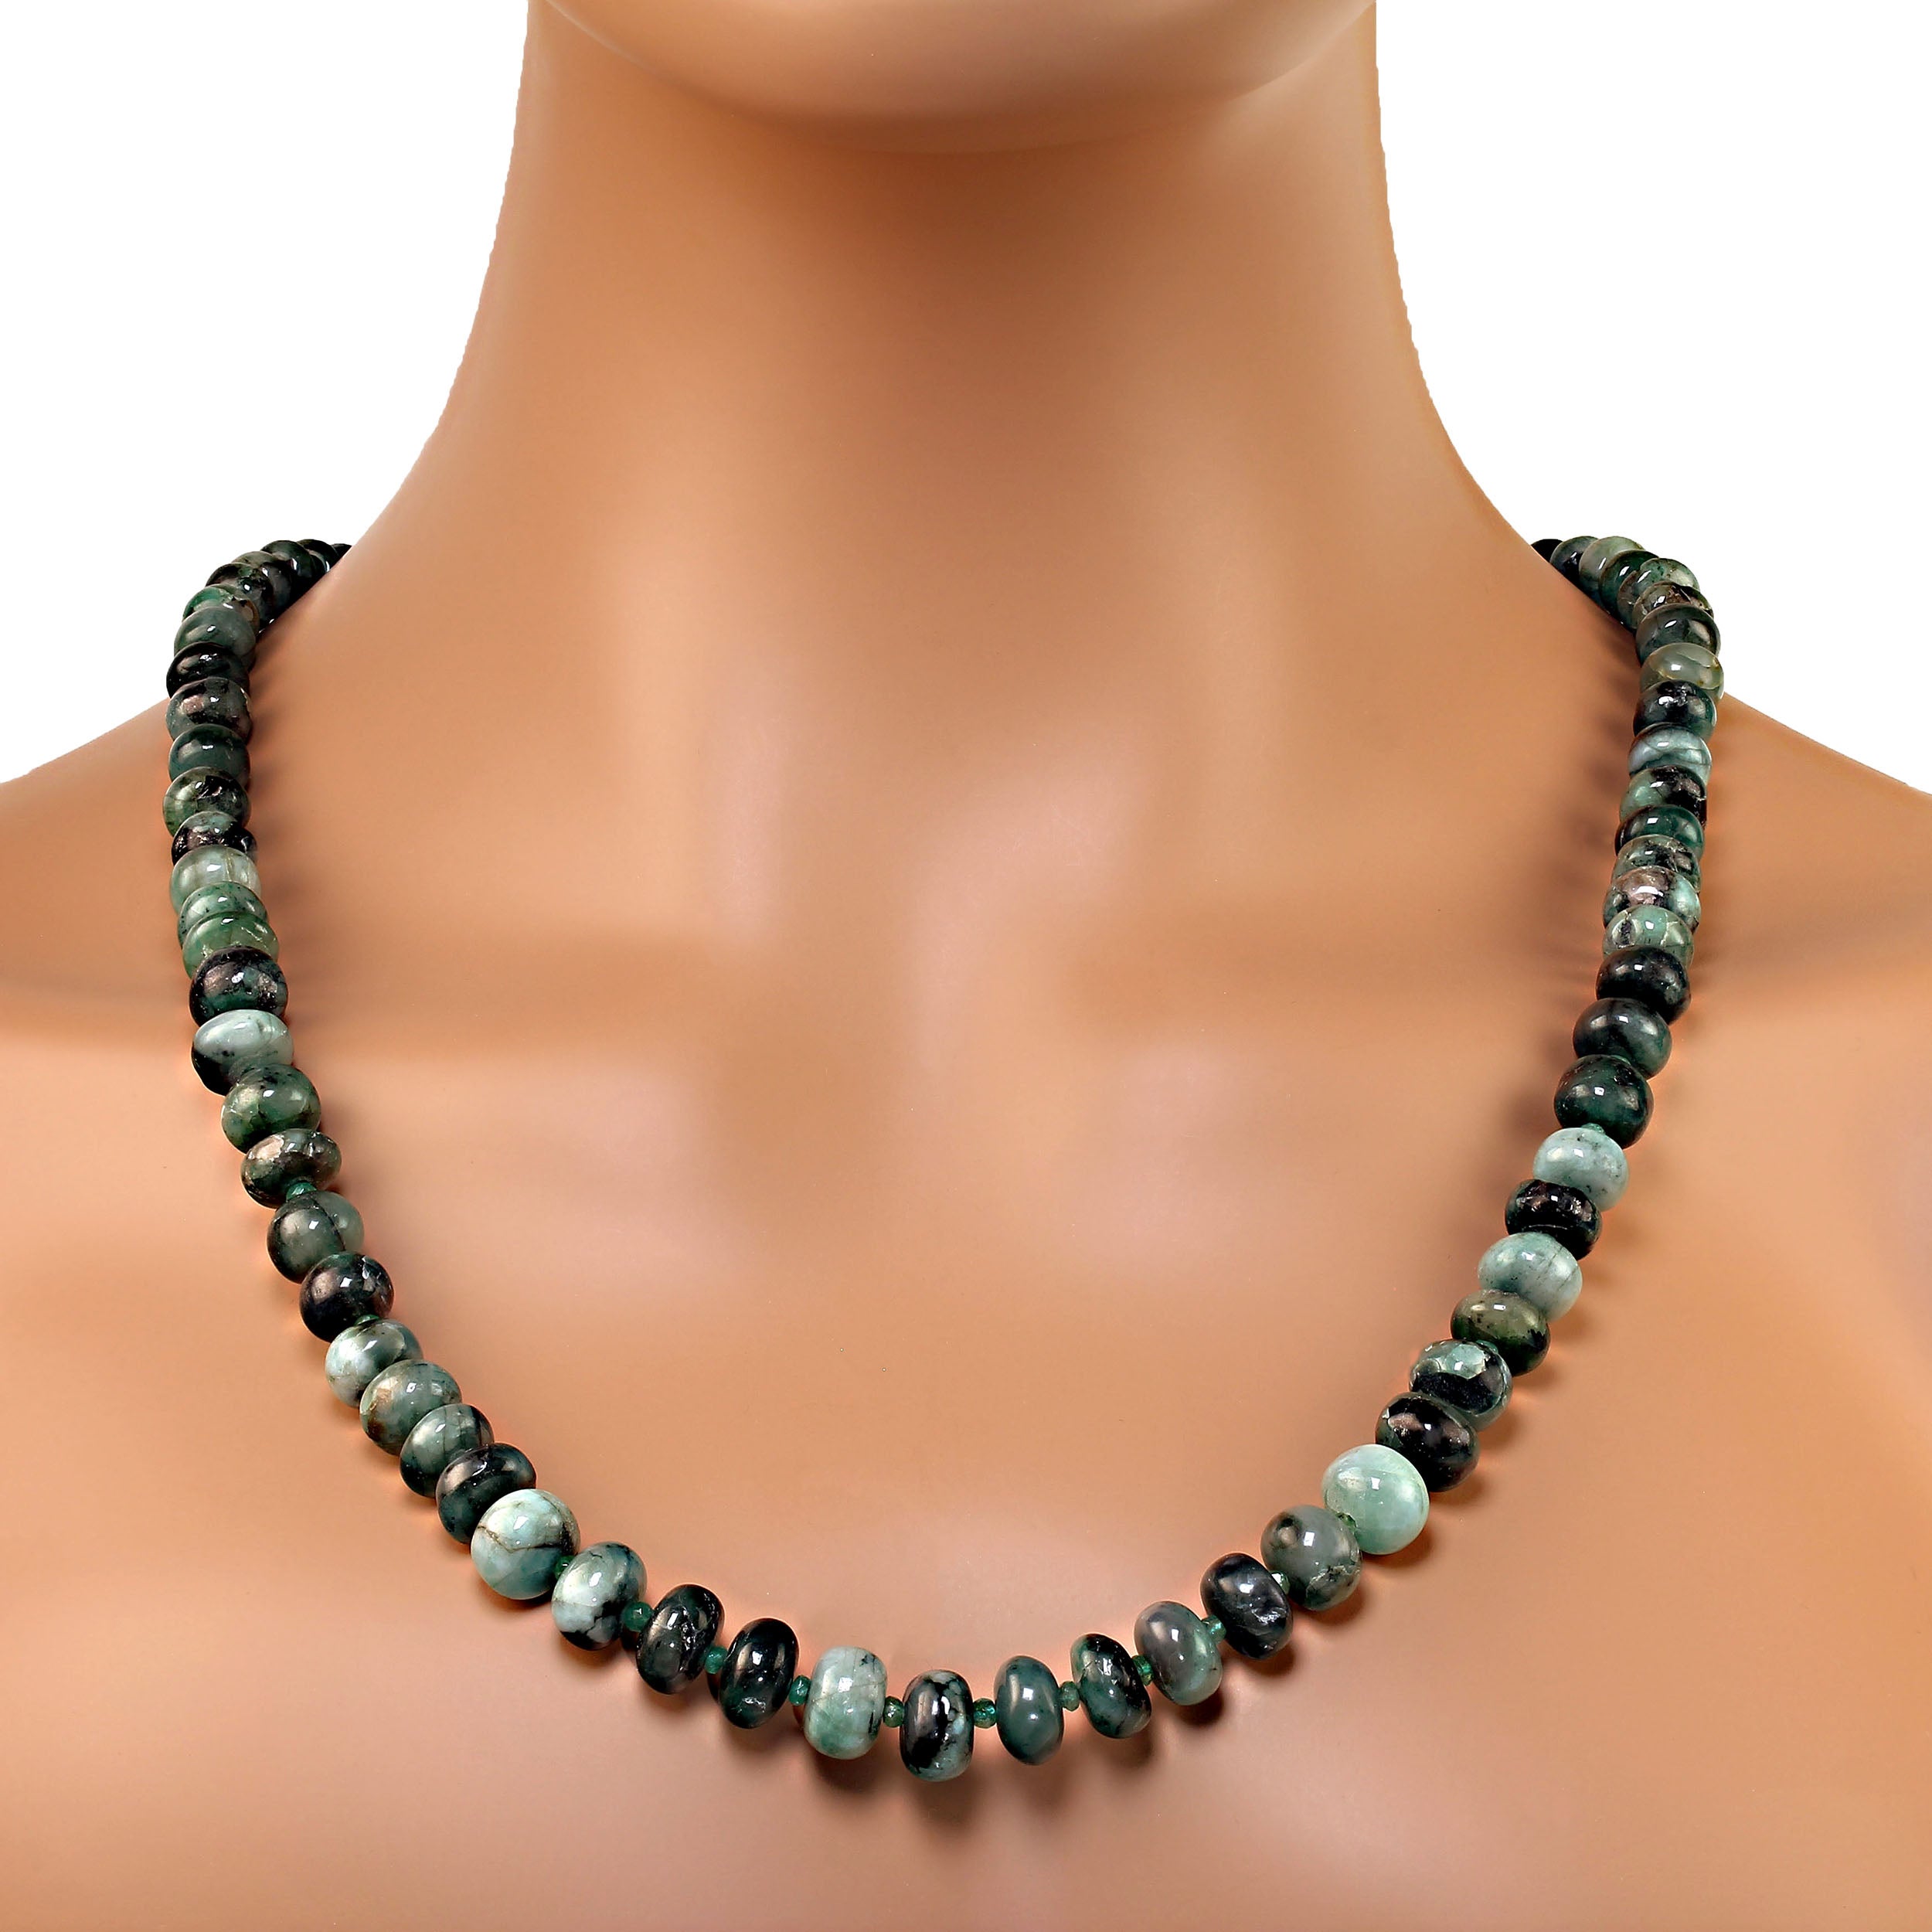 AJD 25 Inch Graduated Rich Green Emerald Matrix Rondelle necklace. Great Gift!